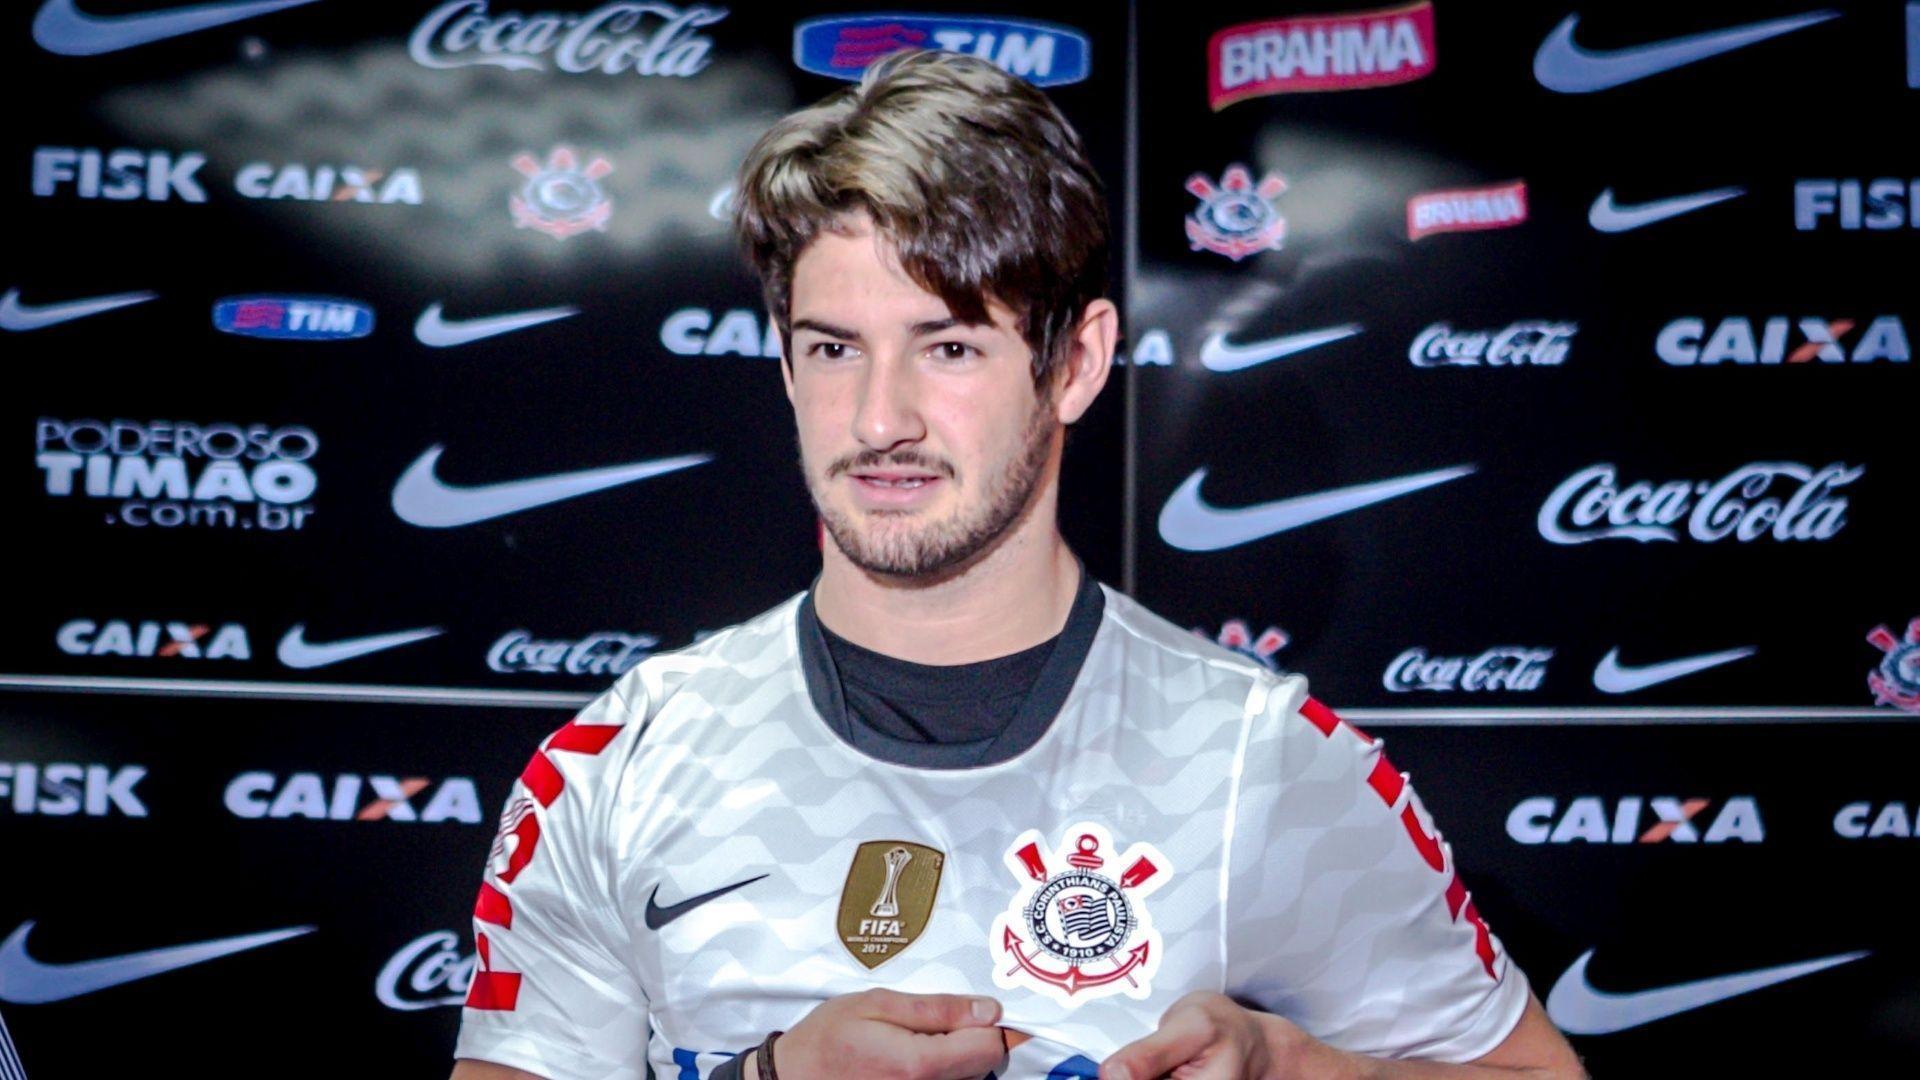 The forward of Corinthians Alexandre Pato wallpaper and image